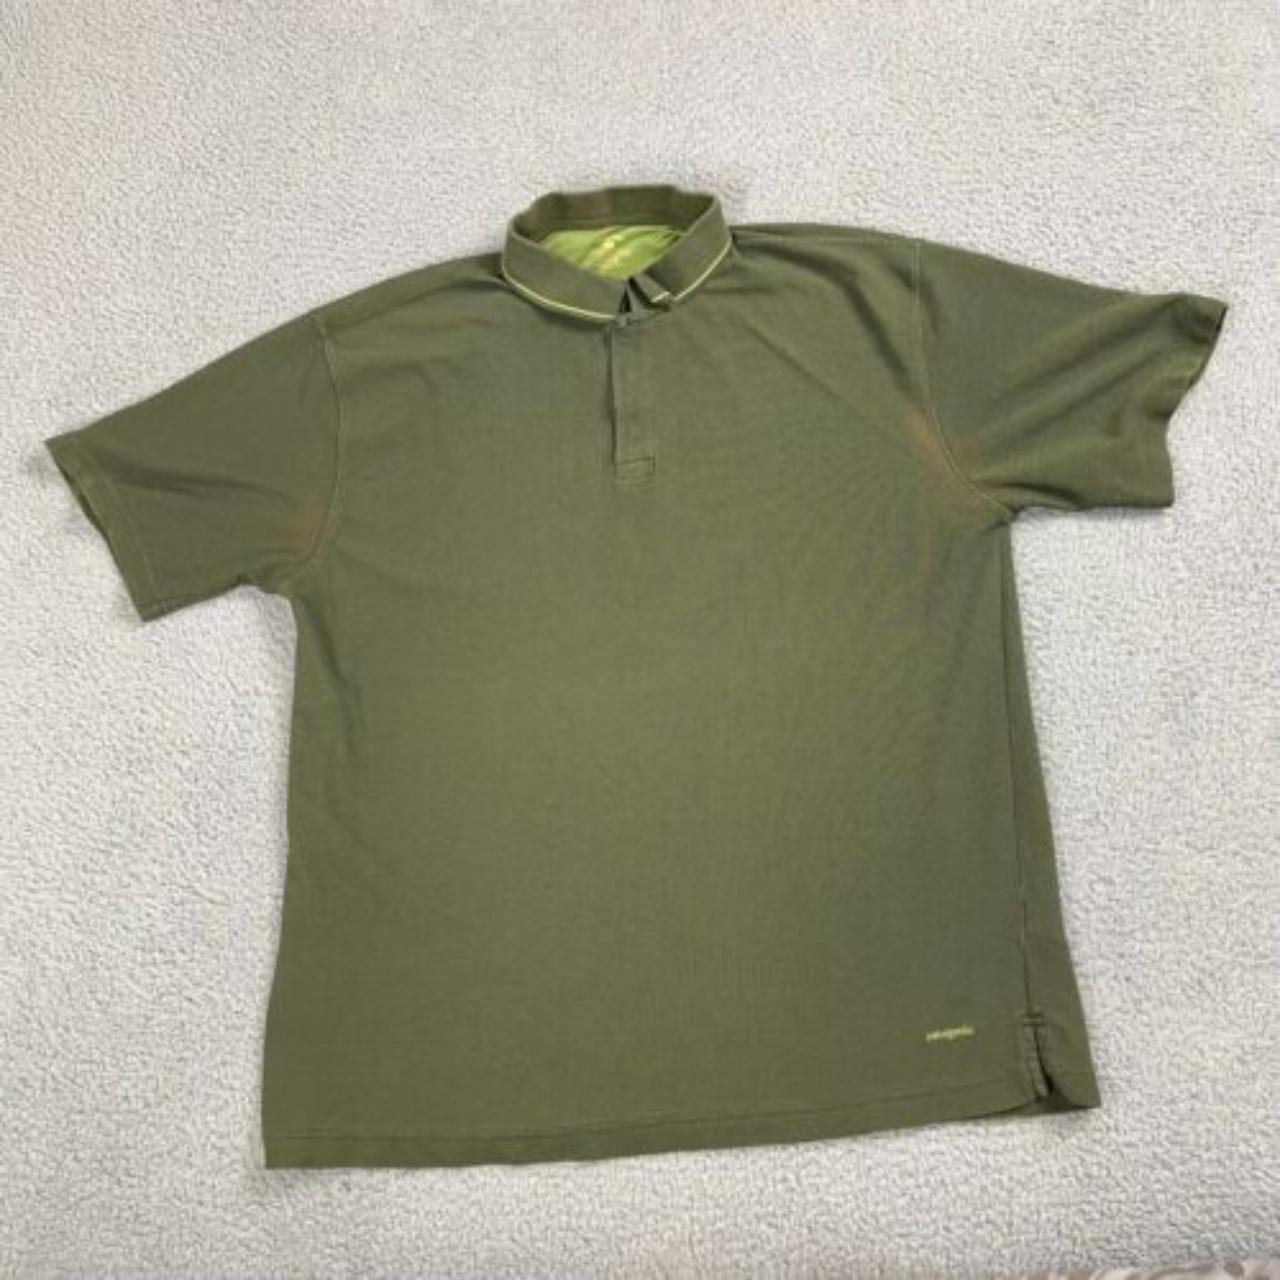 #Patagonia Adult Large Short Sleeve Outdoor Casual... - Depop